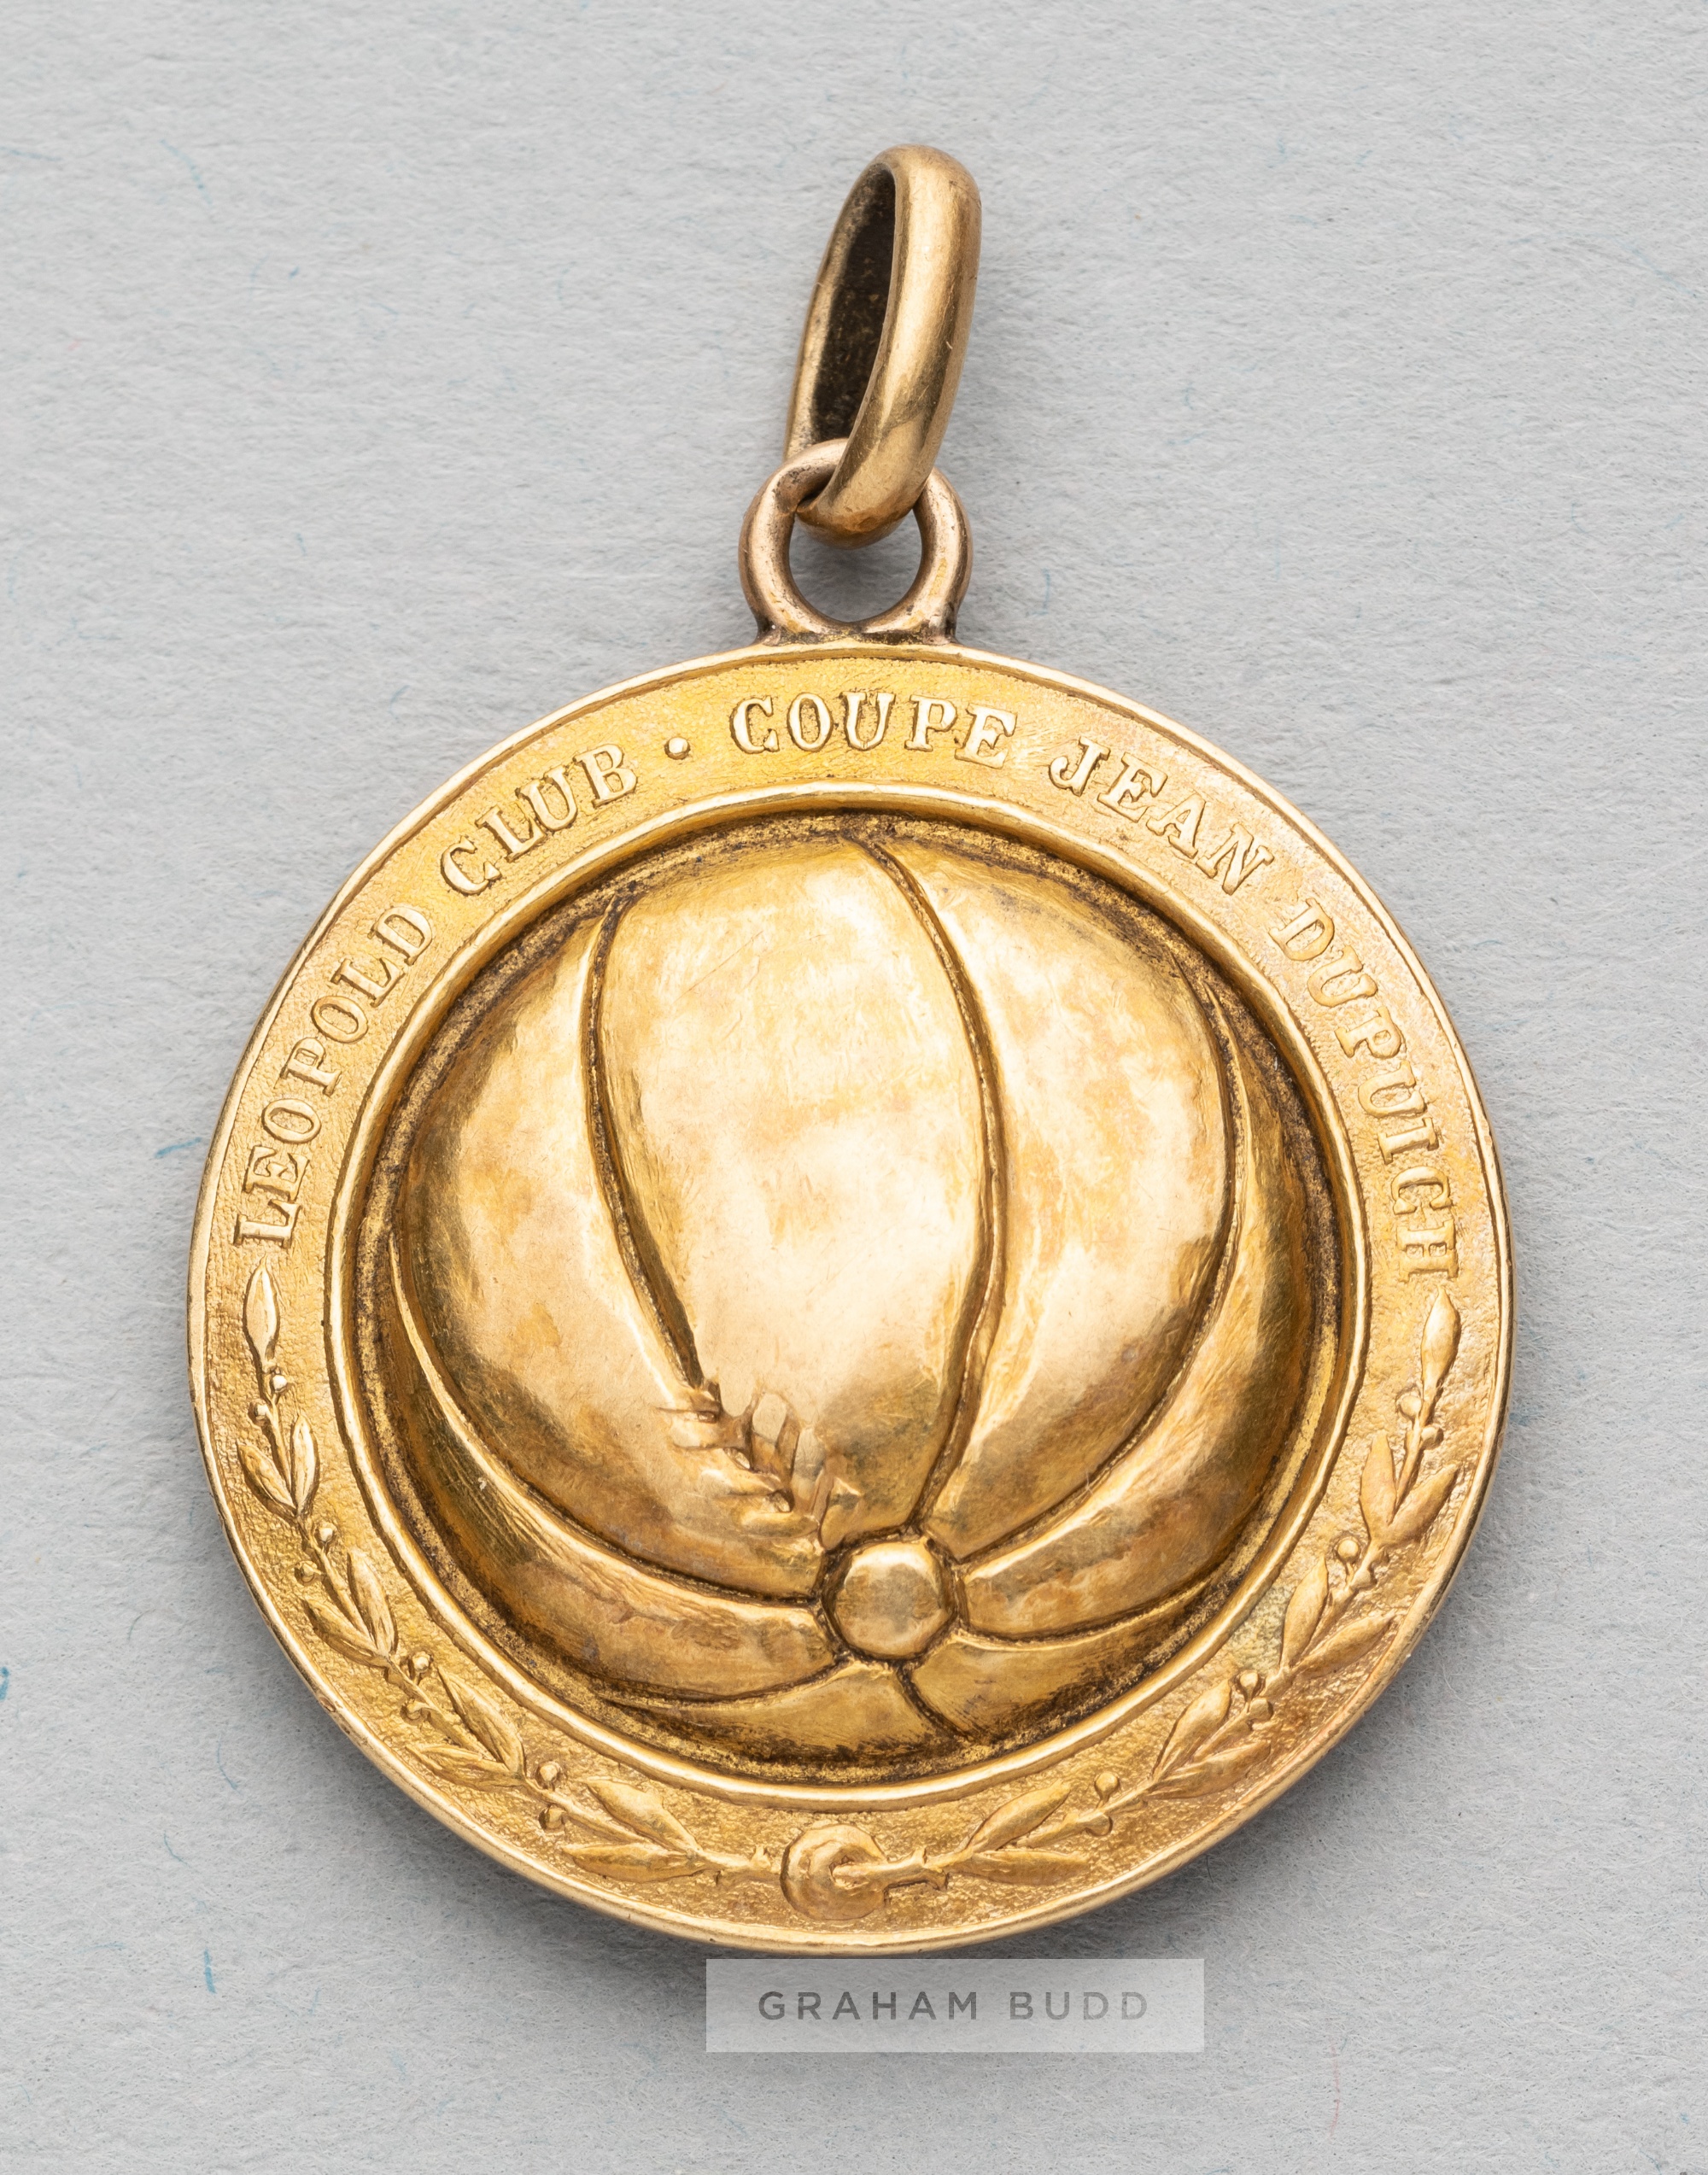 Leopold Club Coupe Jean Dupuich yellow metal medal,  modelled with a central football with a